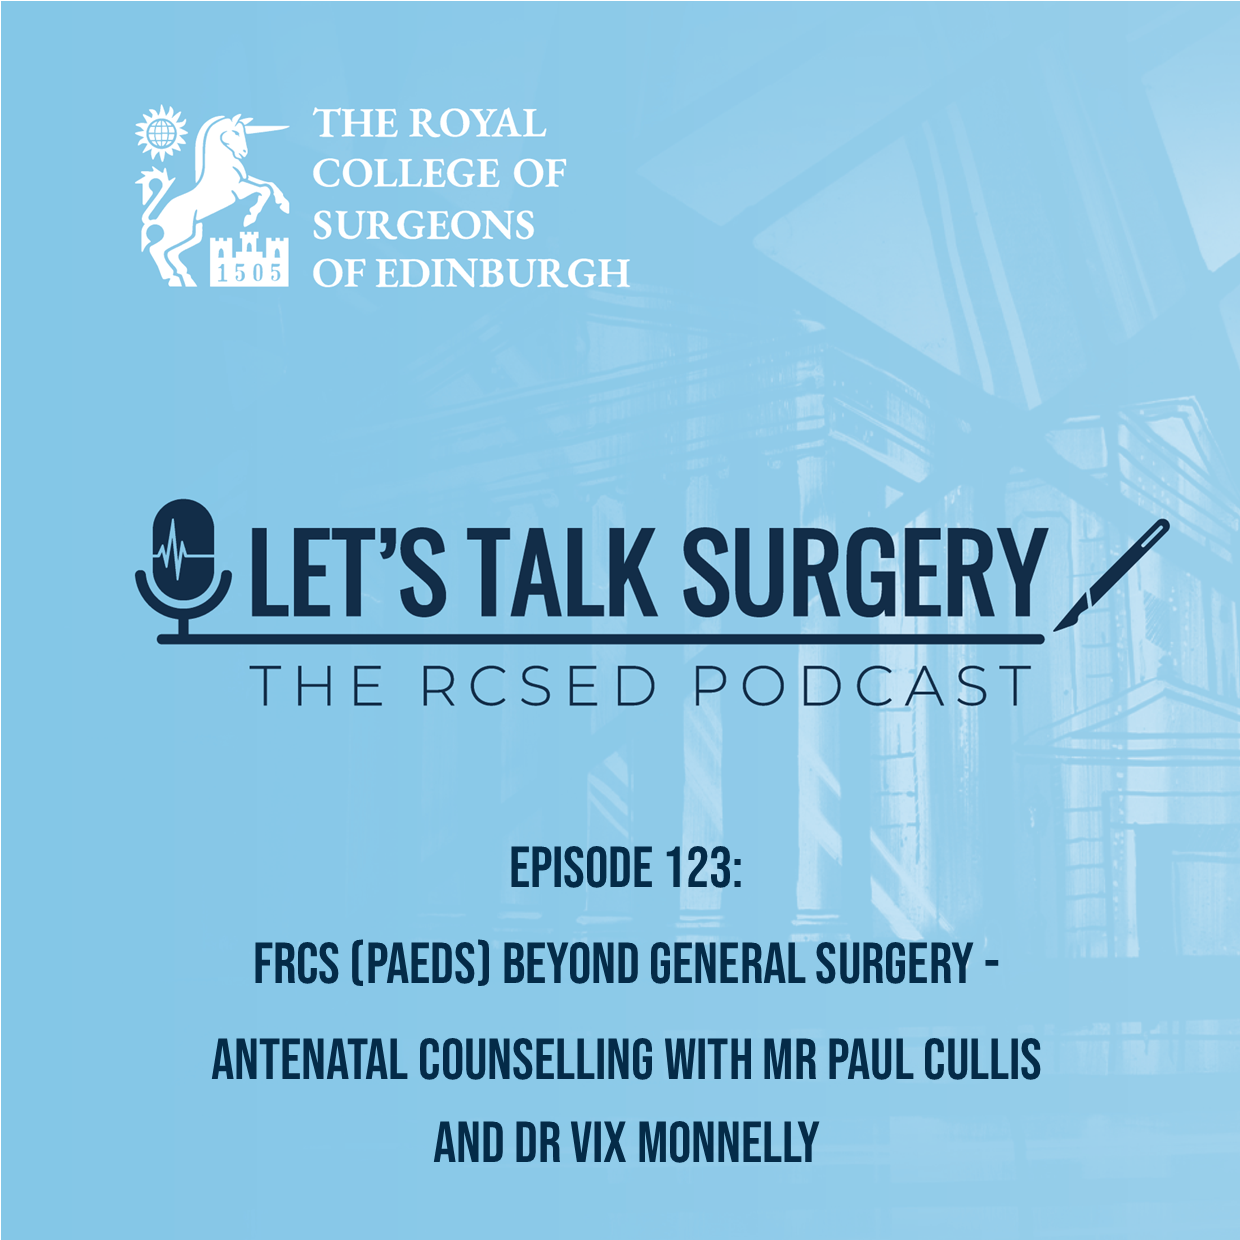 FRCS (Paeds) Beyond General Surgery - Antenatal Counselling with Mr Paul Cullis and Dr Vix Monnelly